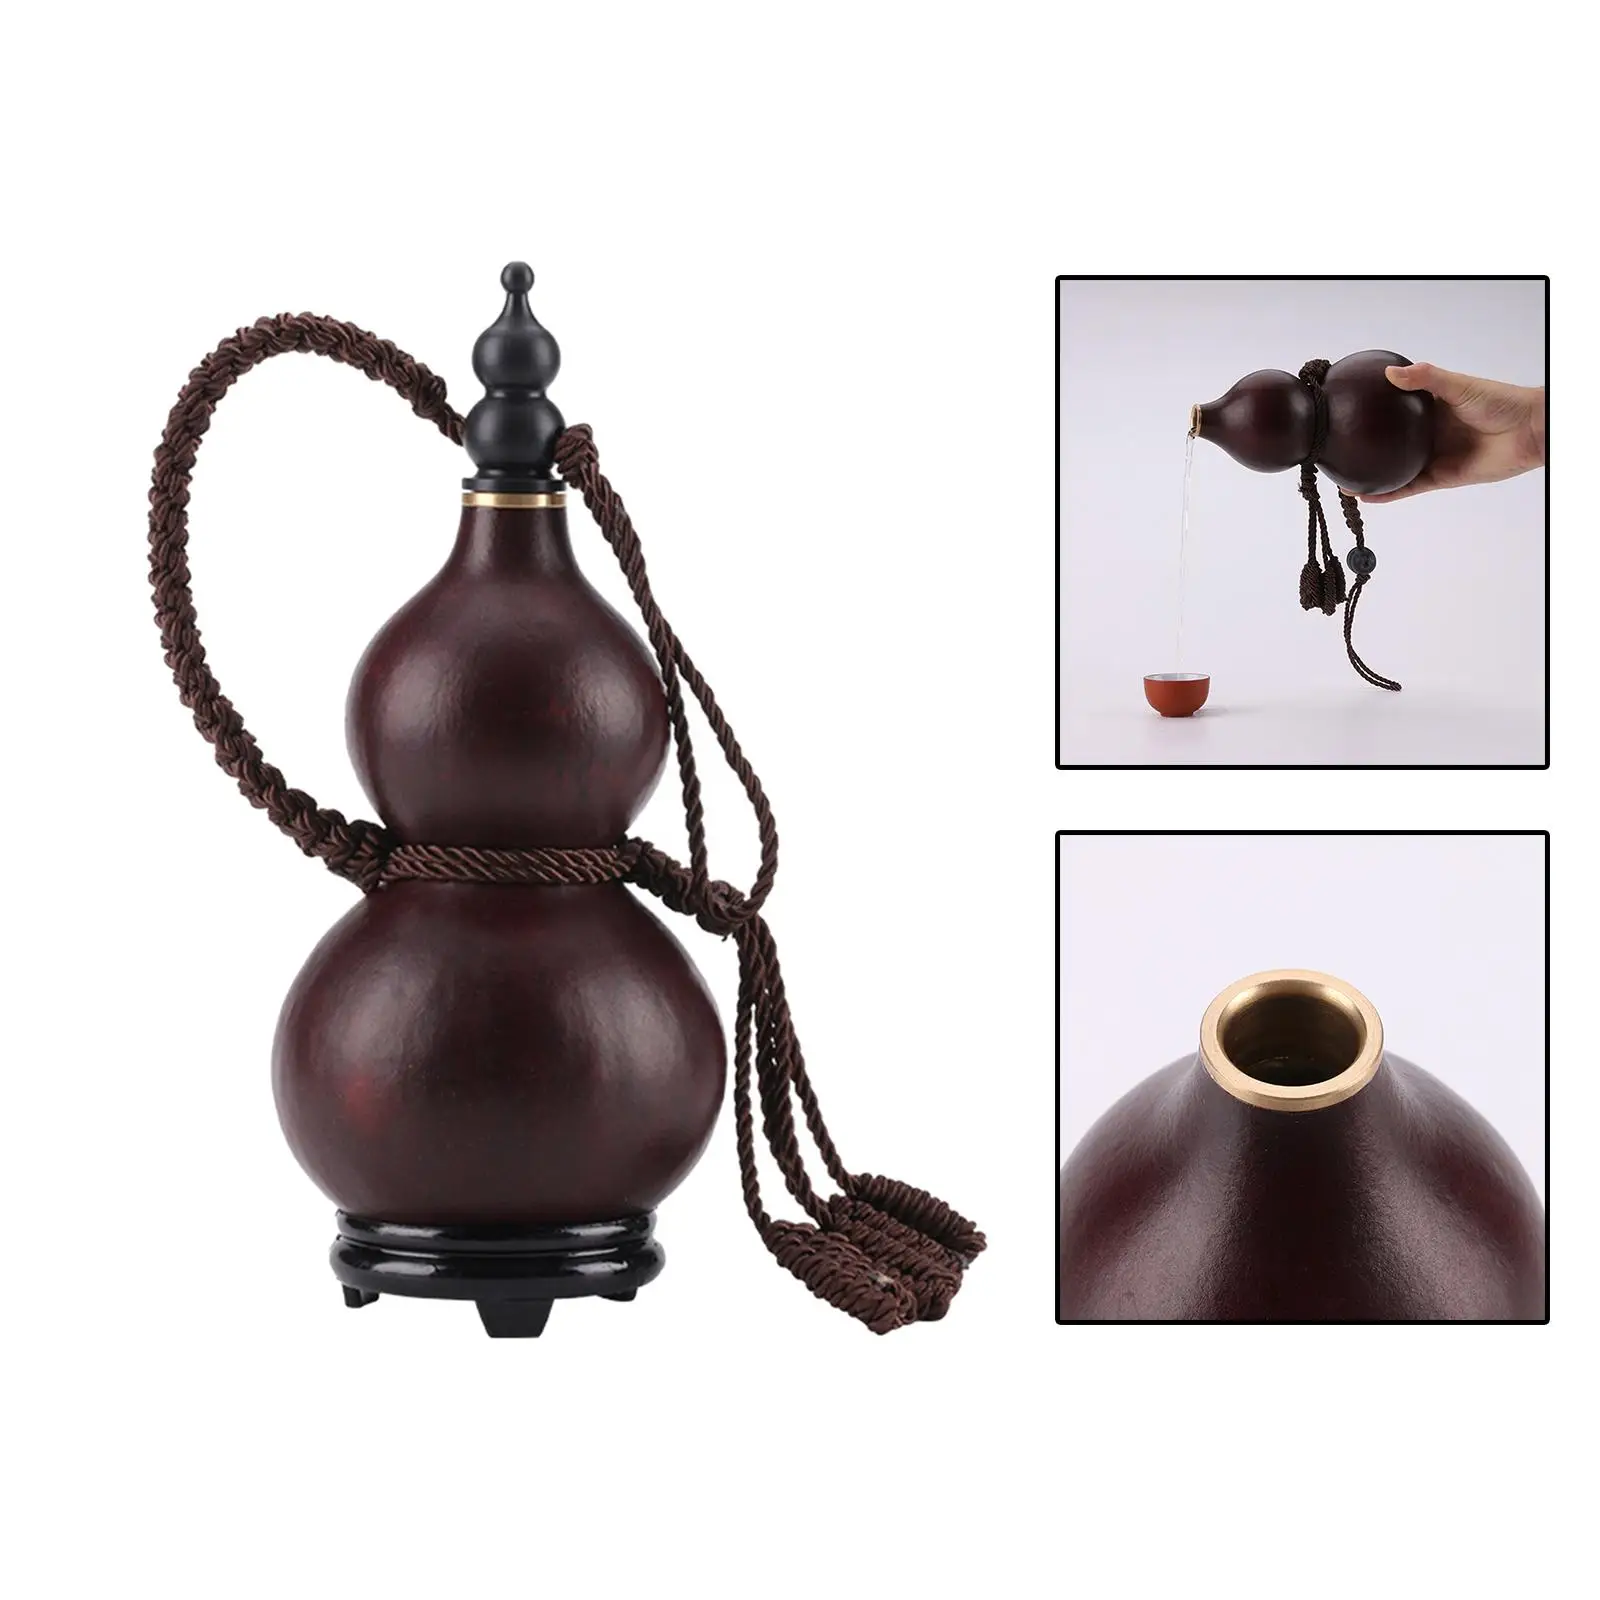 Traditional Gourd Wine Bottle with Lid Beeswax Waterproof Drinking Gourd for Indoor Drinks Holder home Decoration